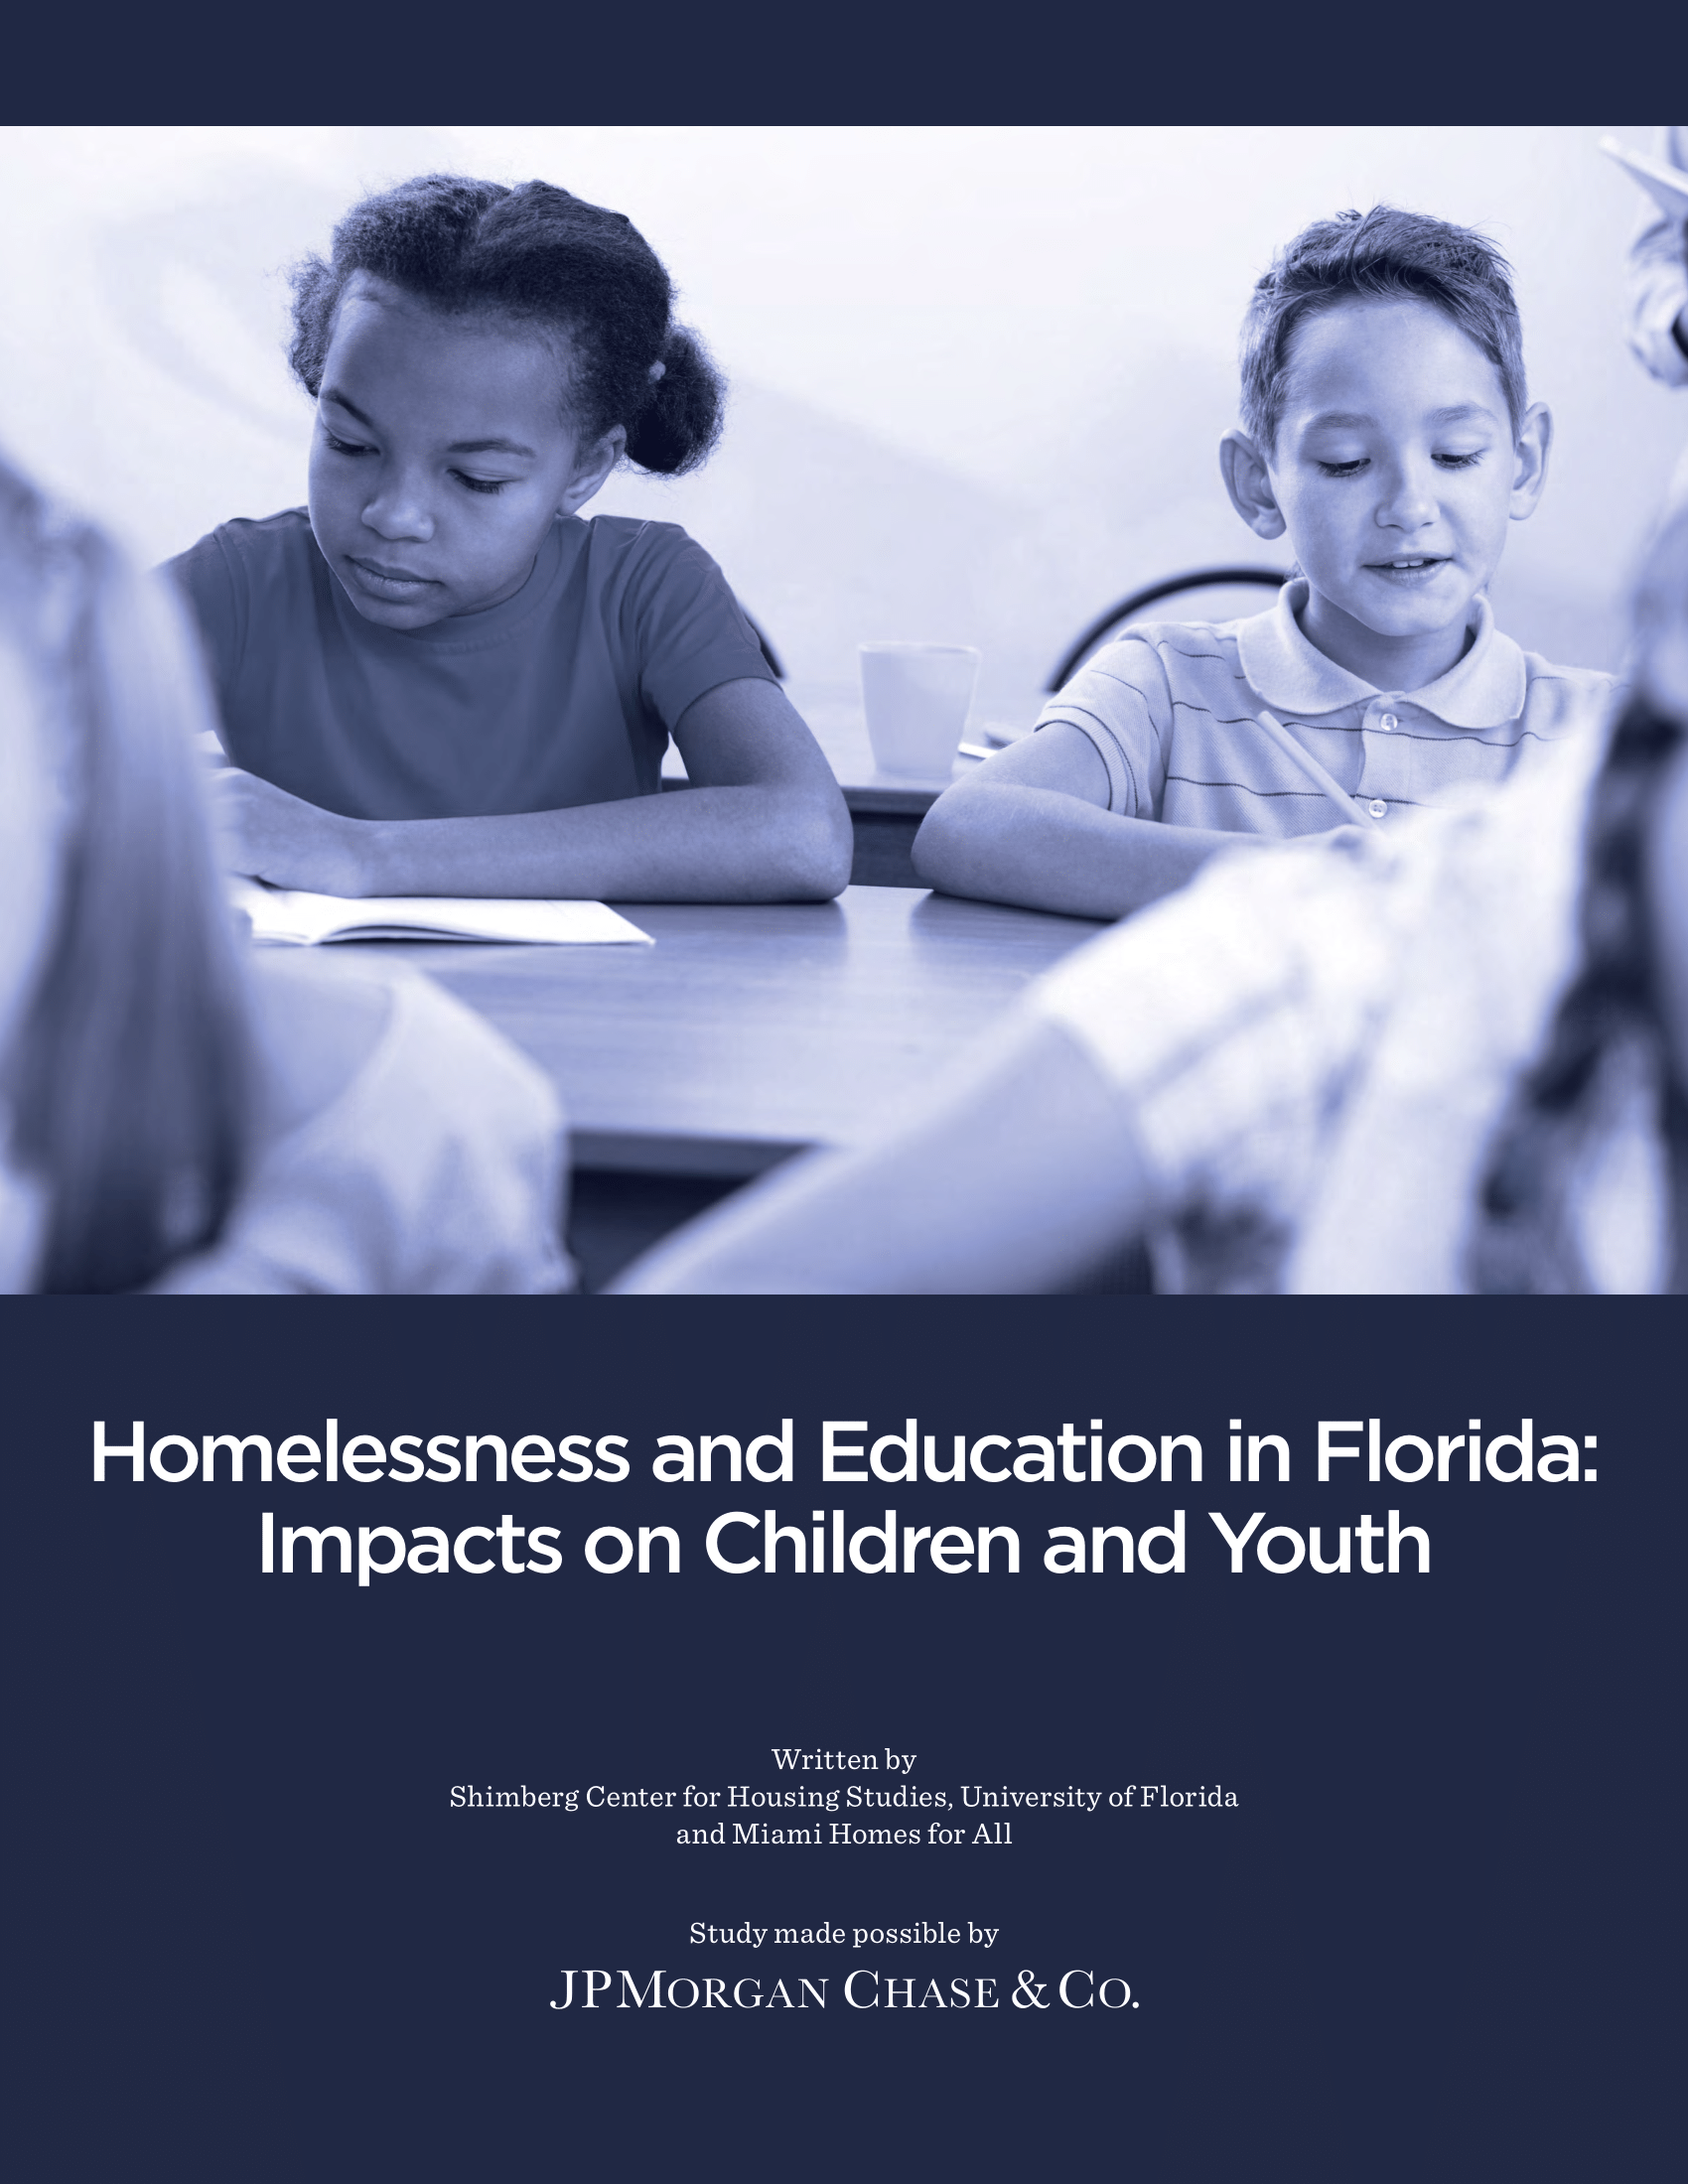 Homelessness+and+Education+in+Florida+Impacts+on+Children+and+Youth+-+October+2017-01.png